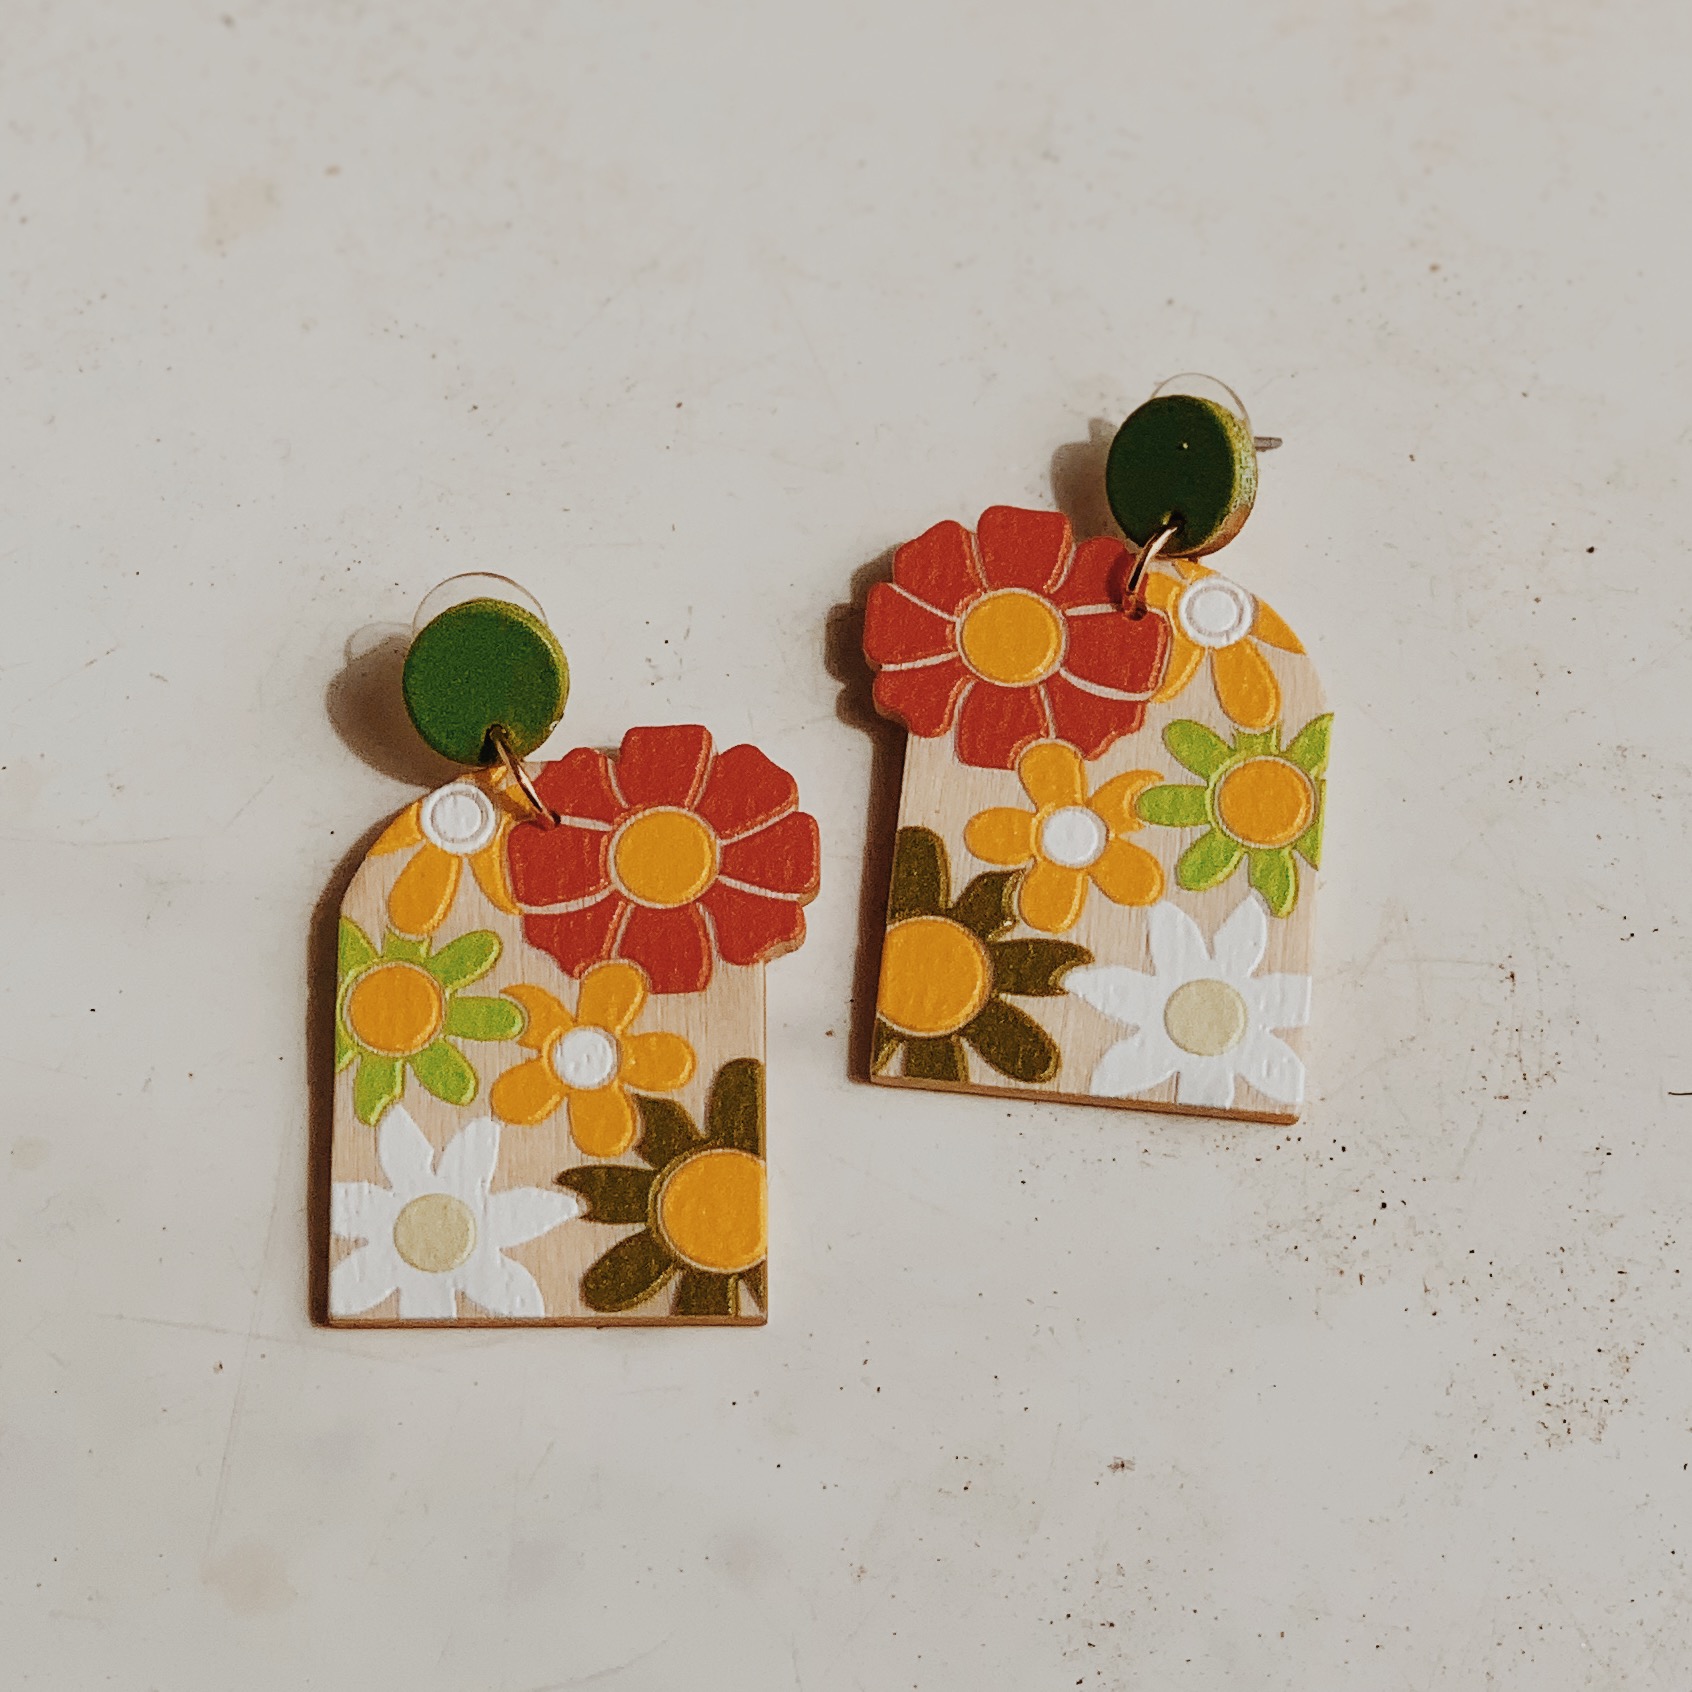 These adorable and boho earrings measure around 2 inches in length!